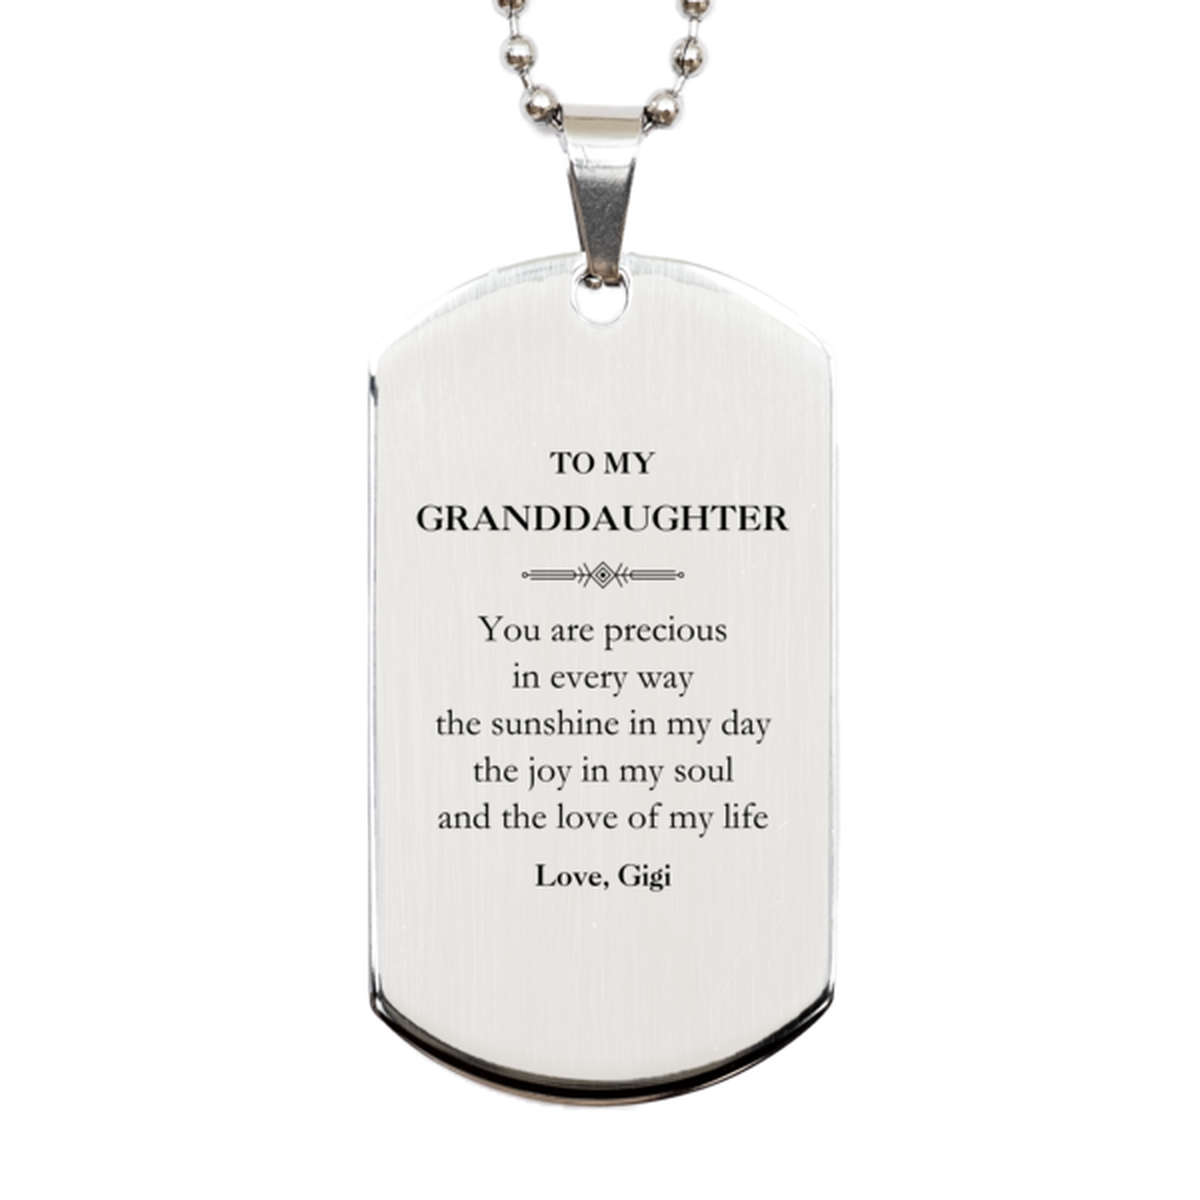 Graduation Gifts for Granddaughter Silver Dog Tag Present from Gigi, Christmas Granddaughter Birthday Gifts Granddaughter You are precious in every way the sunshine in my day. Love, Gigi